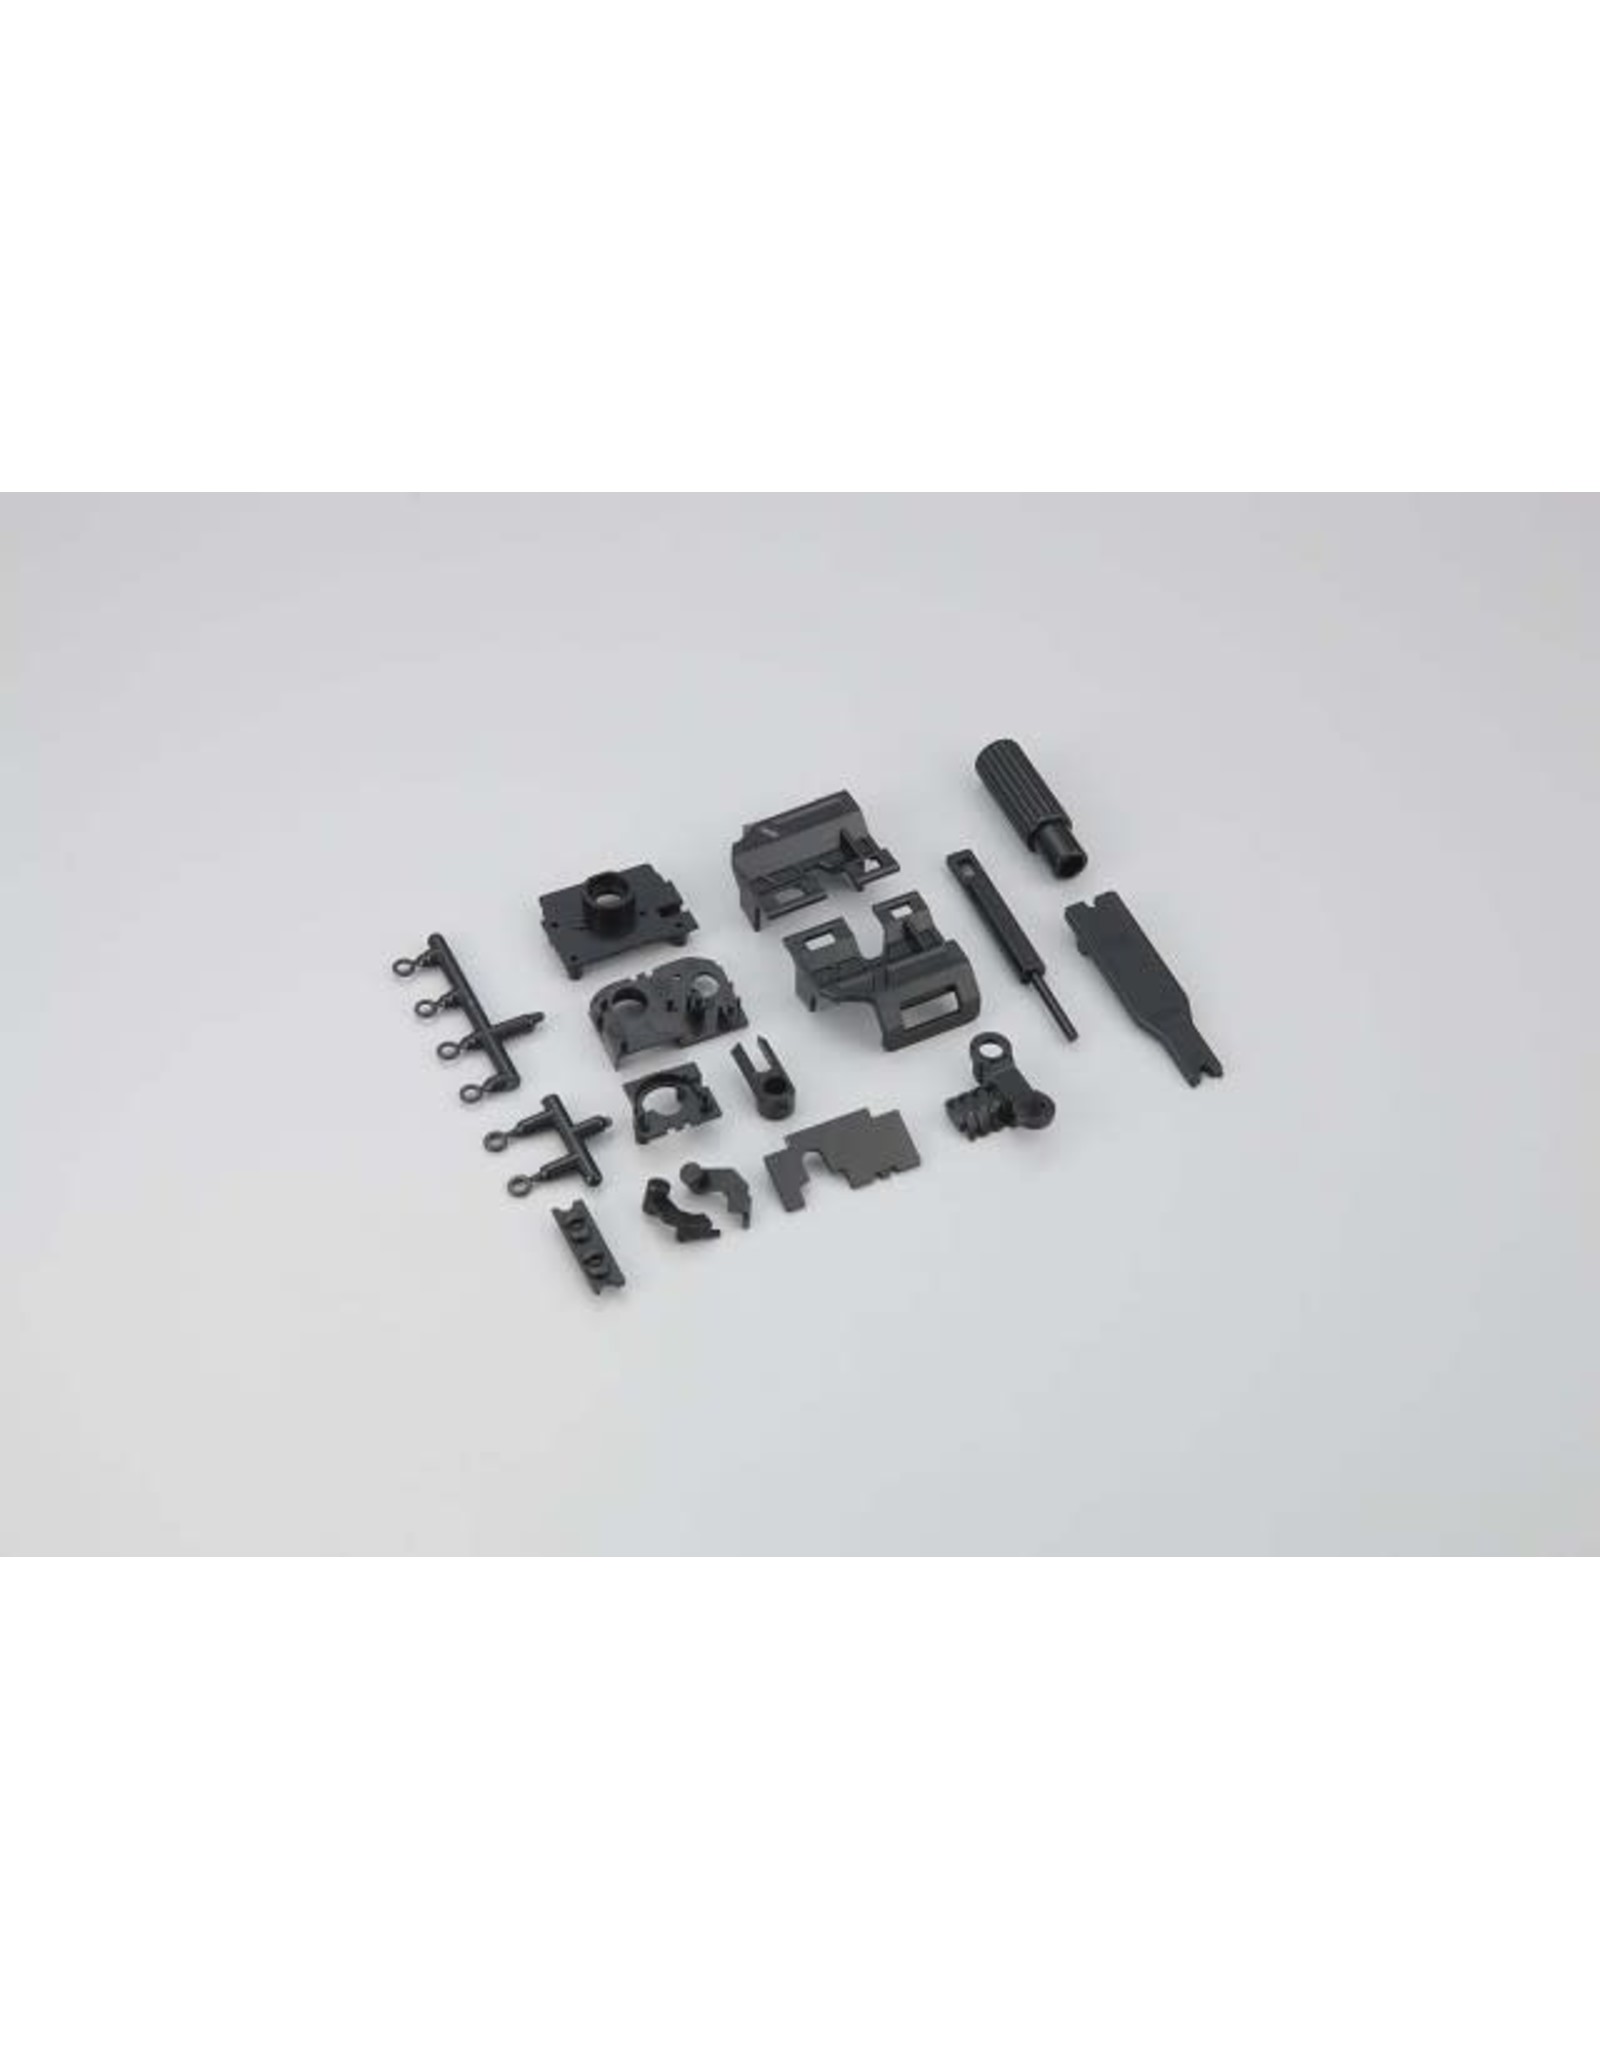 Kyosho Mini Z Chassis Small Parts set